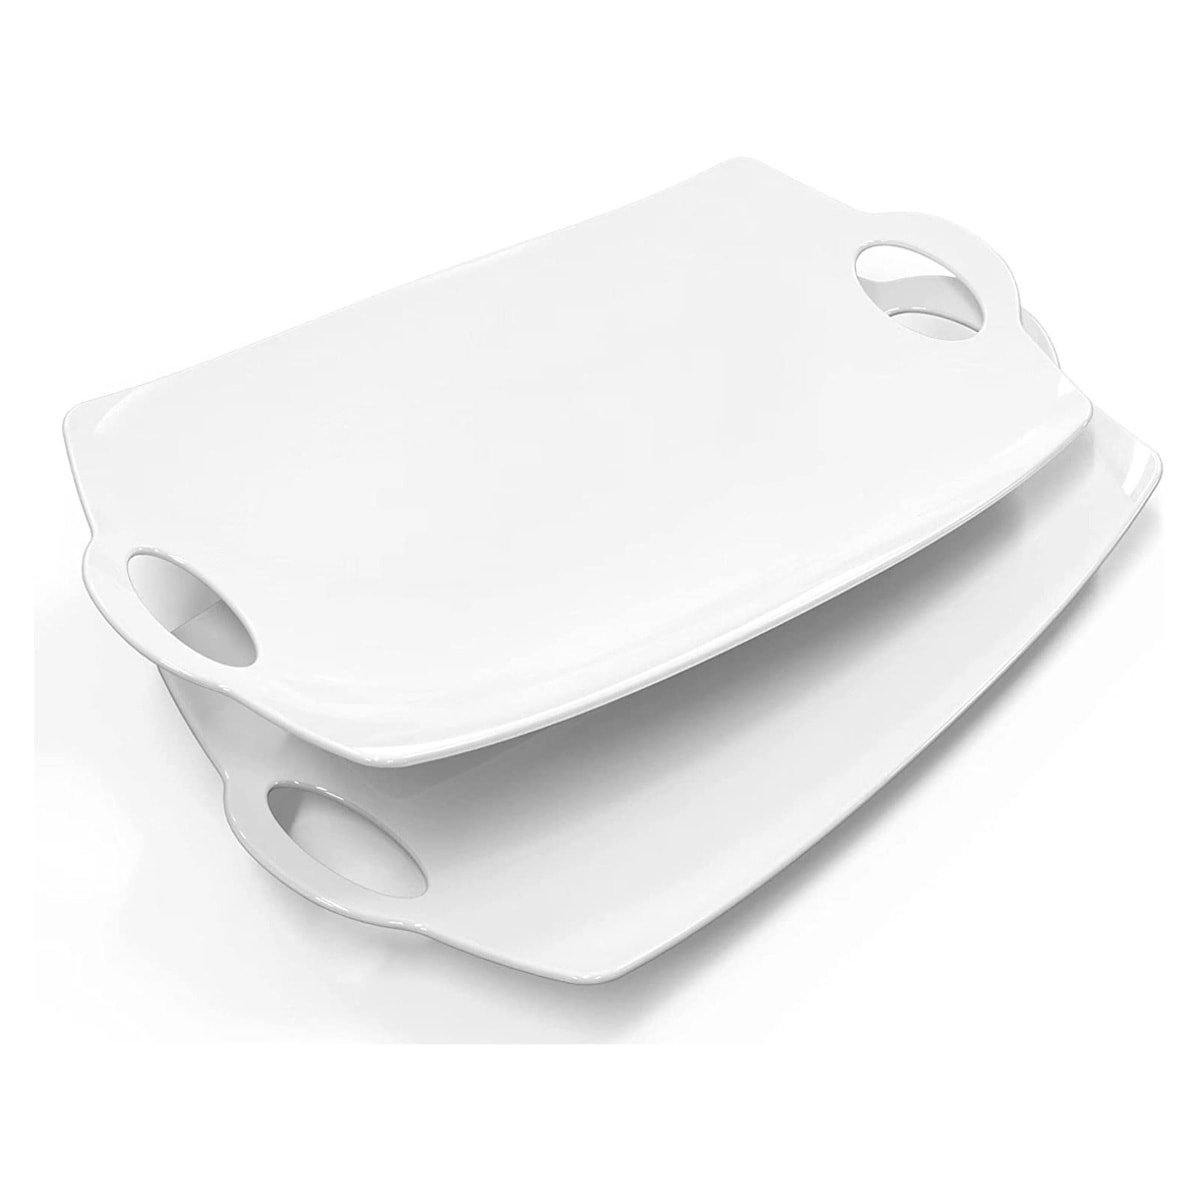 Two rectangular white platters with handles.